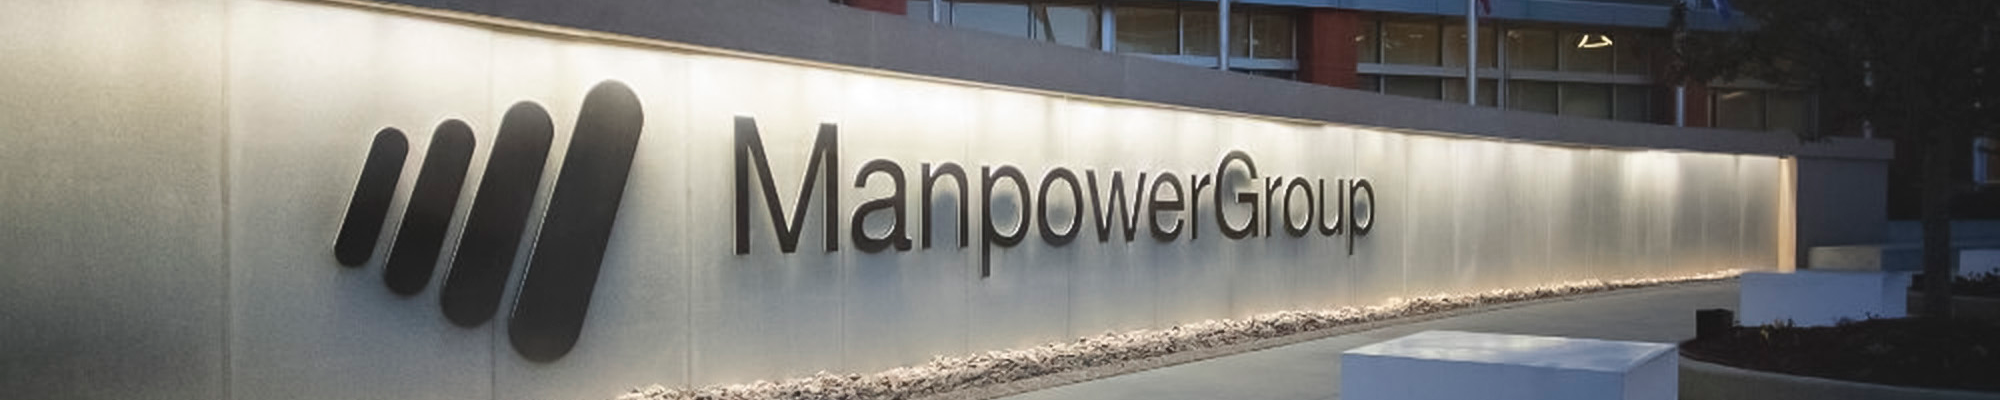 manpowergroup-leading-staffing-and-recruitment-agency